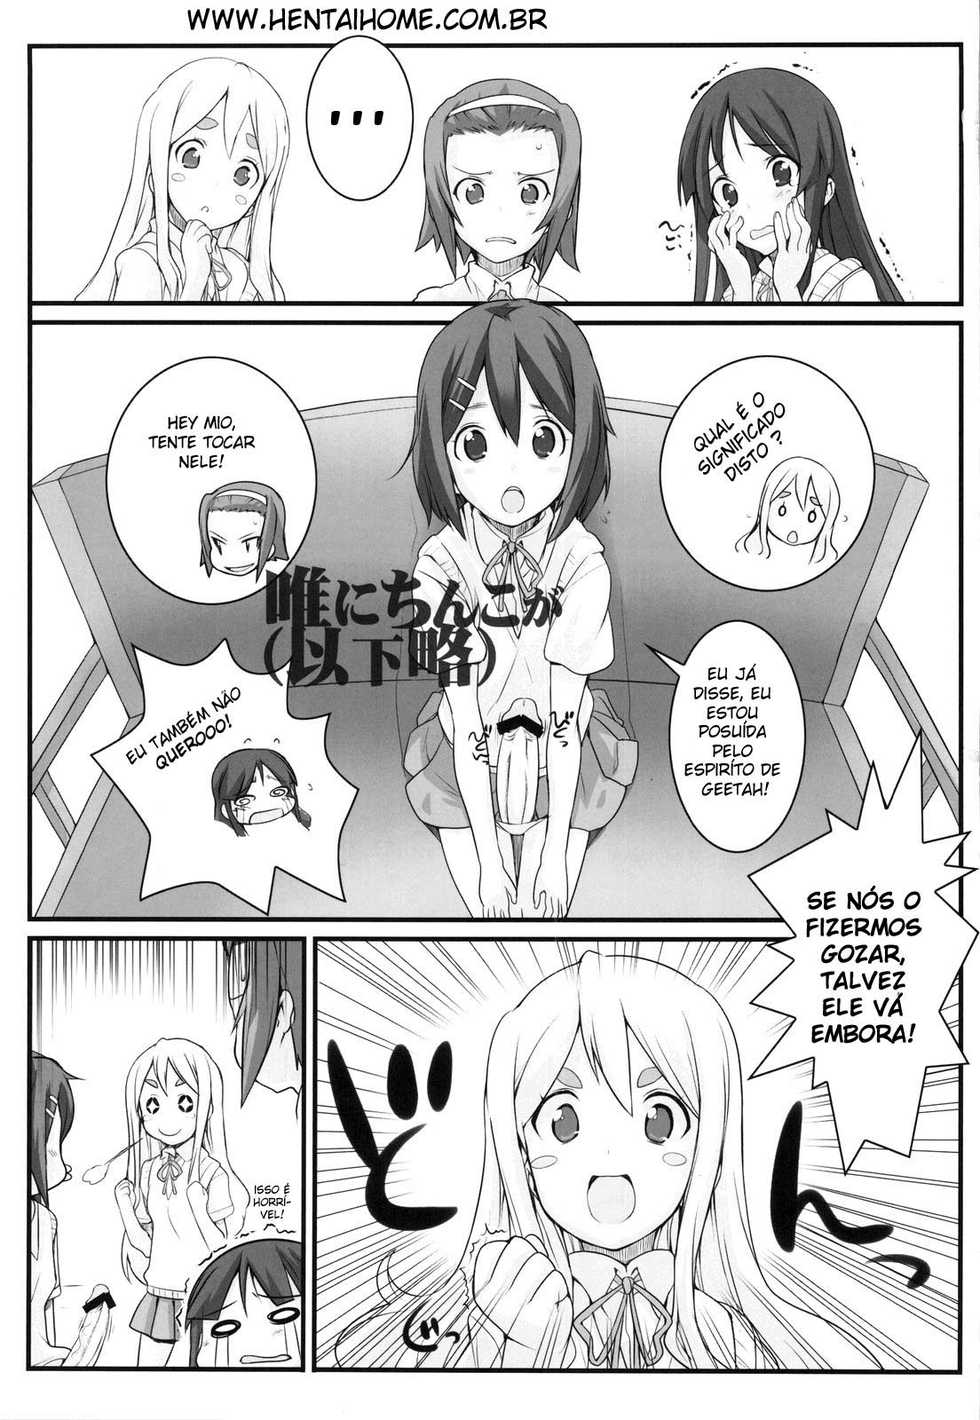 (C78) [Fountain's Square (Hagiya Masakage)] Heat Floor (K-ON!) [Portuguese-BR] [hentaihome.com.br] - Page 5